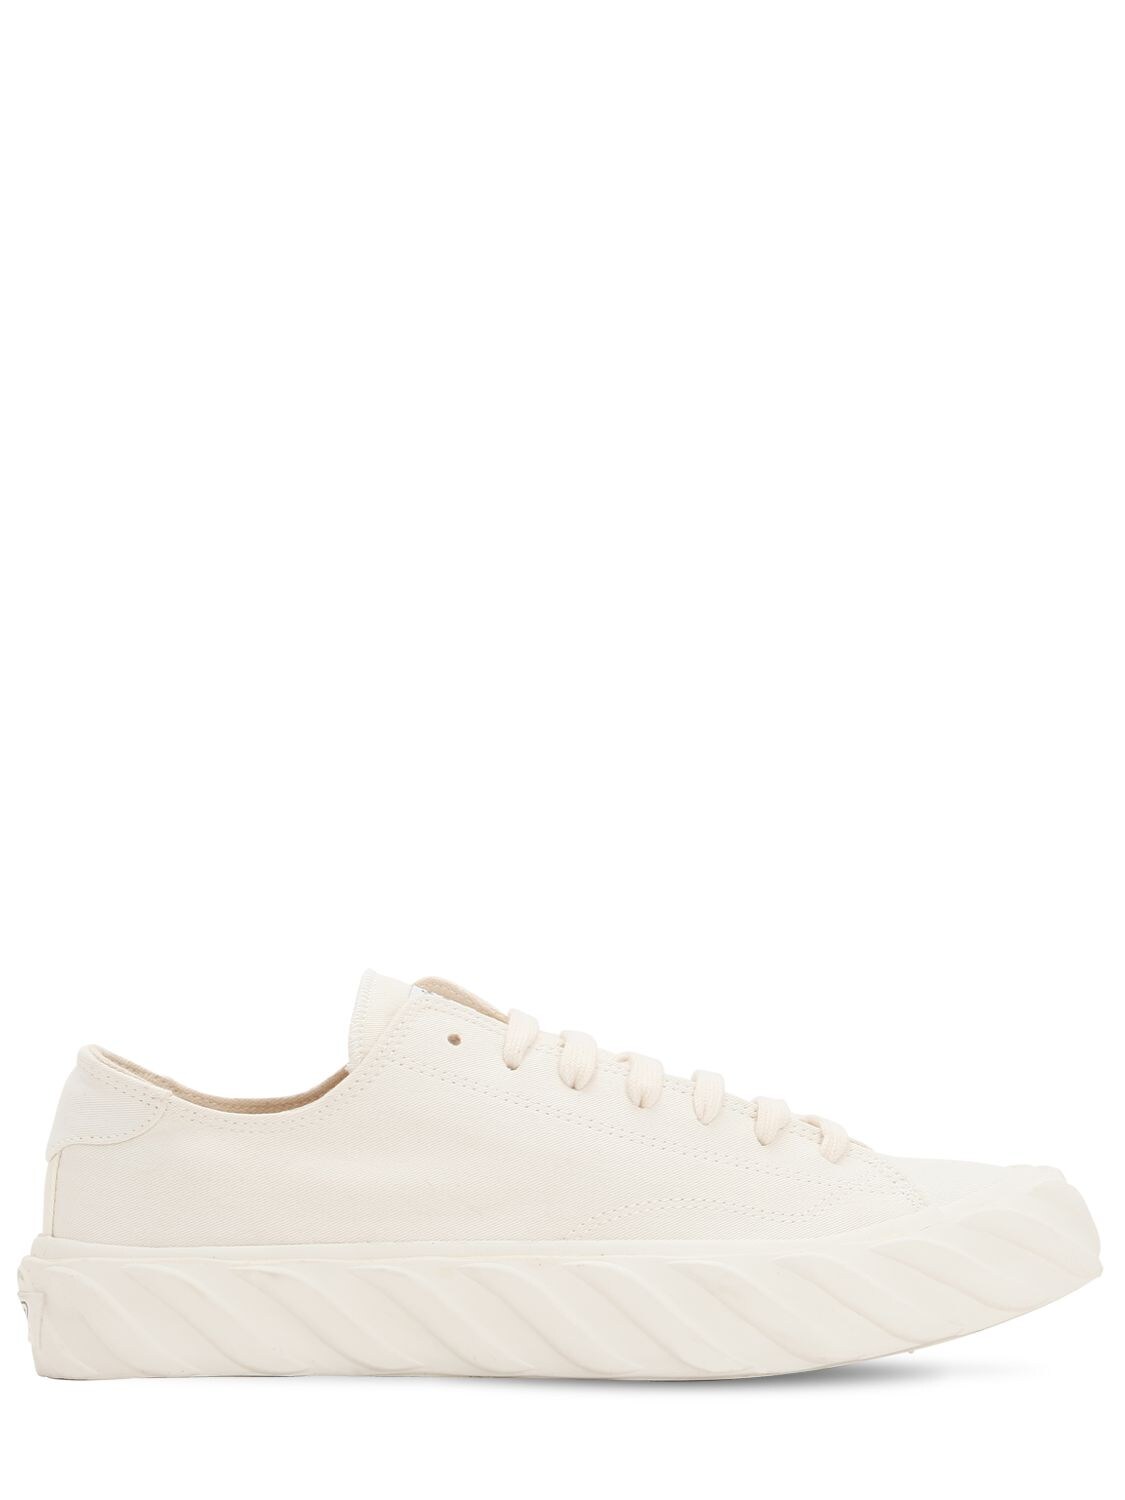 Age - Across To Genuine Era Low Cotton Canvas Sneakers In White